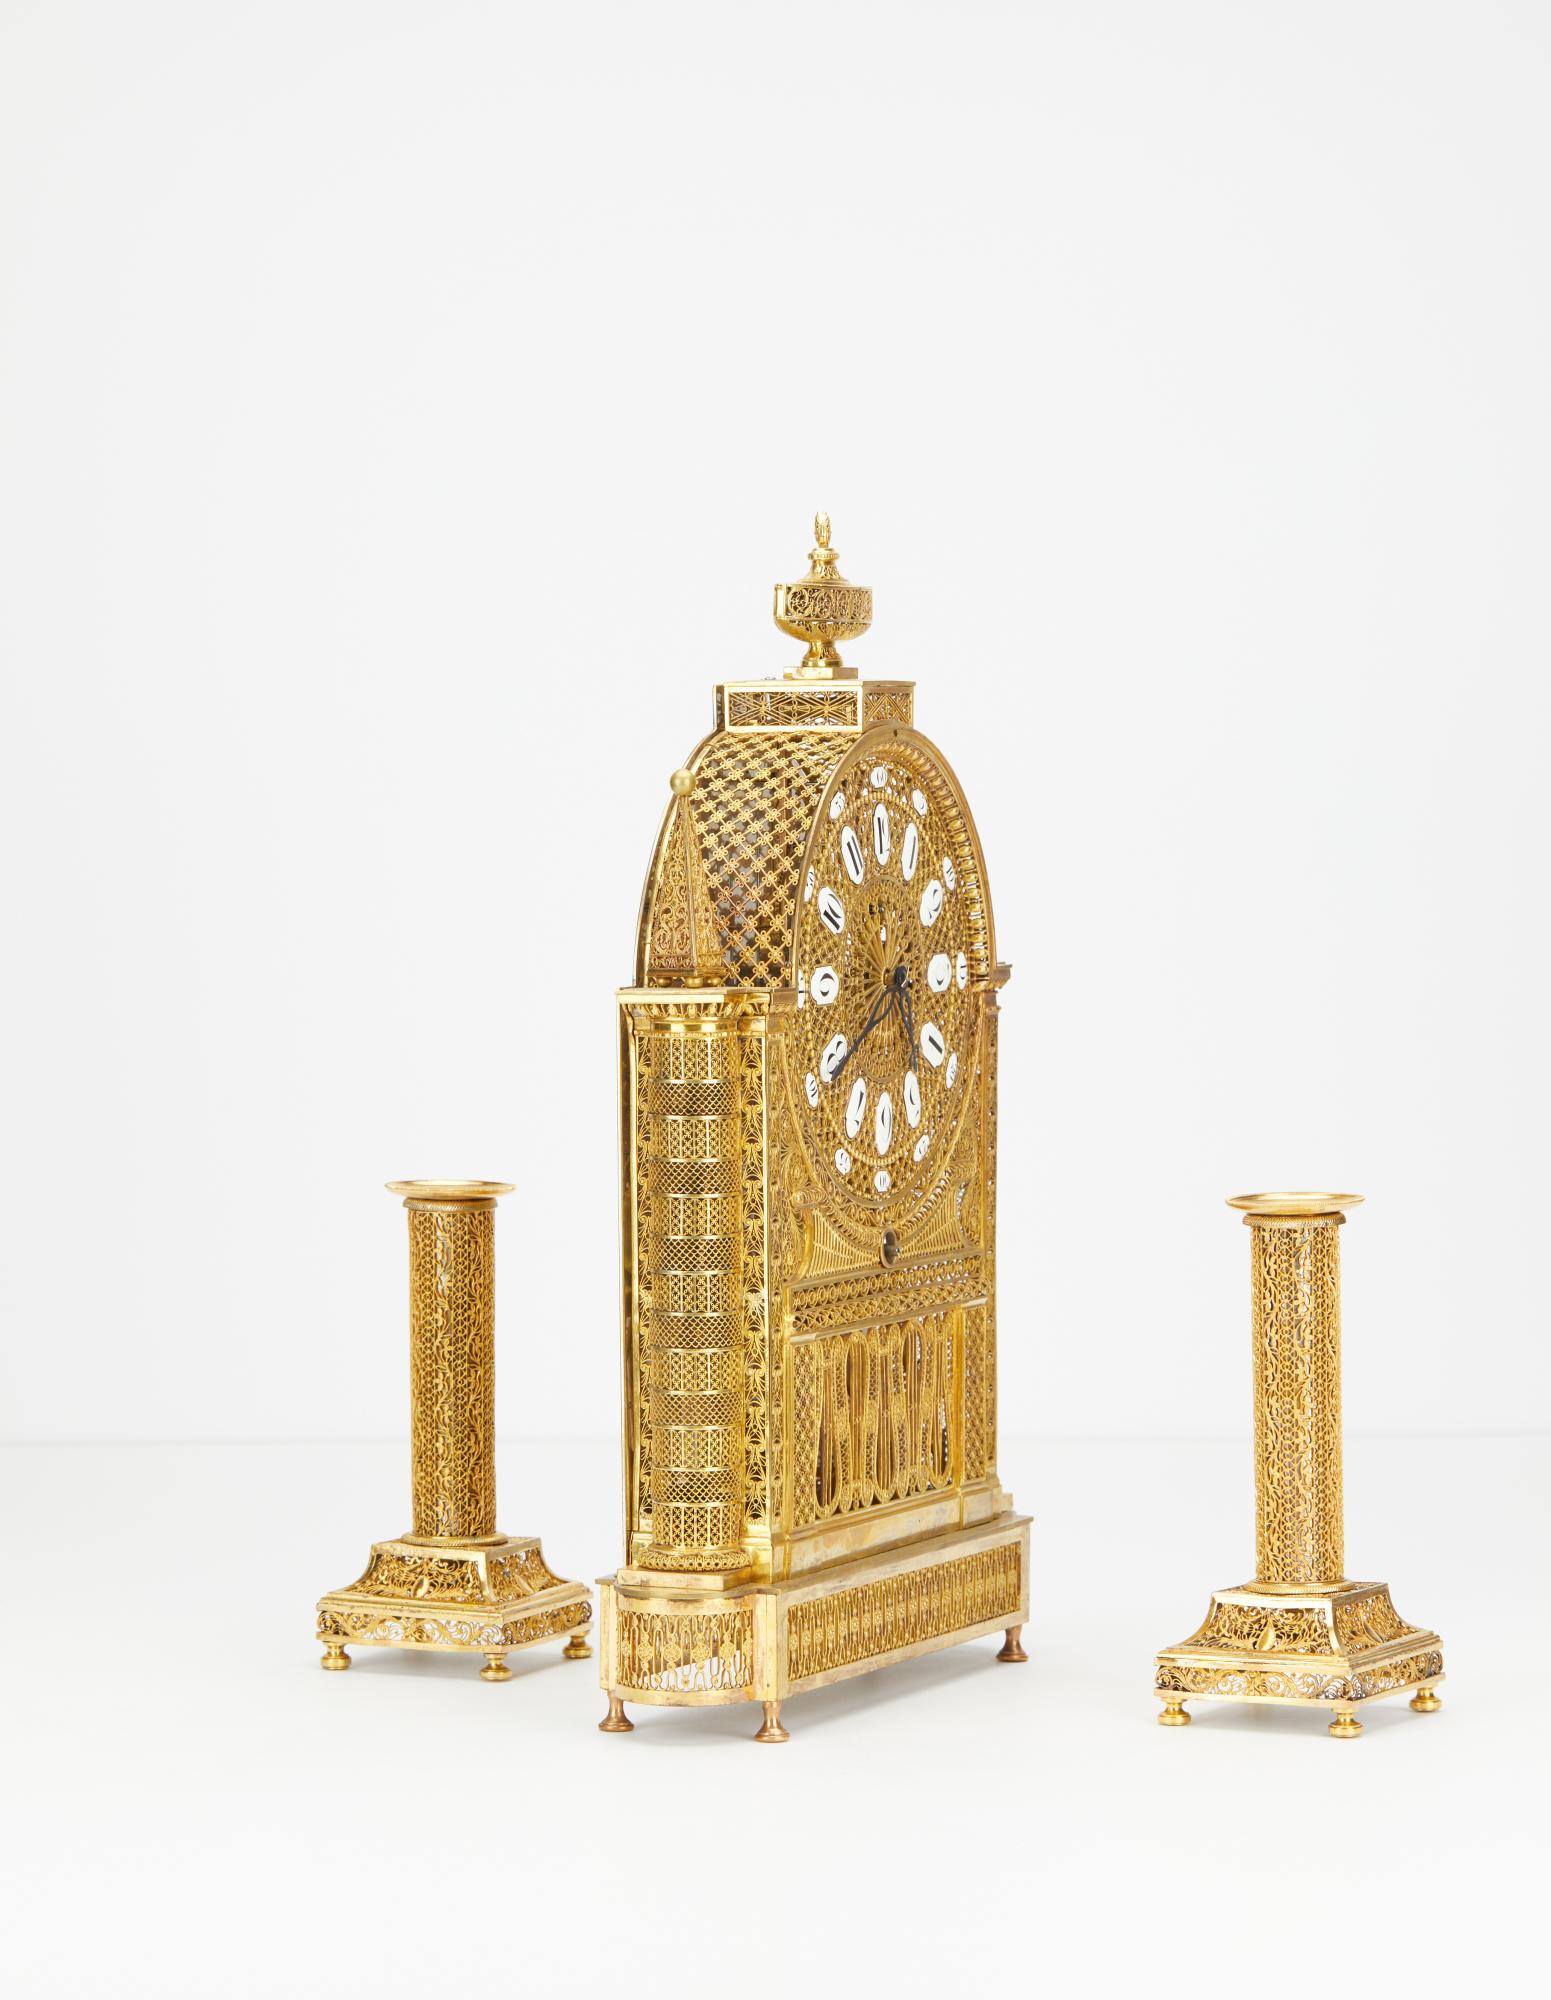 The clock set comprises a skeleton clock of gilded bronze in Arabesque style, together with the original matching gilded bronze candlesticks. The clock stands proudly on four feet and a filigree base. The lovely detailed Arabesque dial has enamel